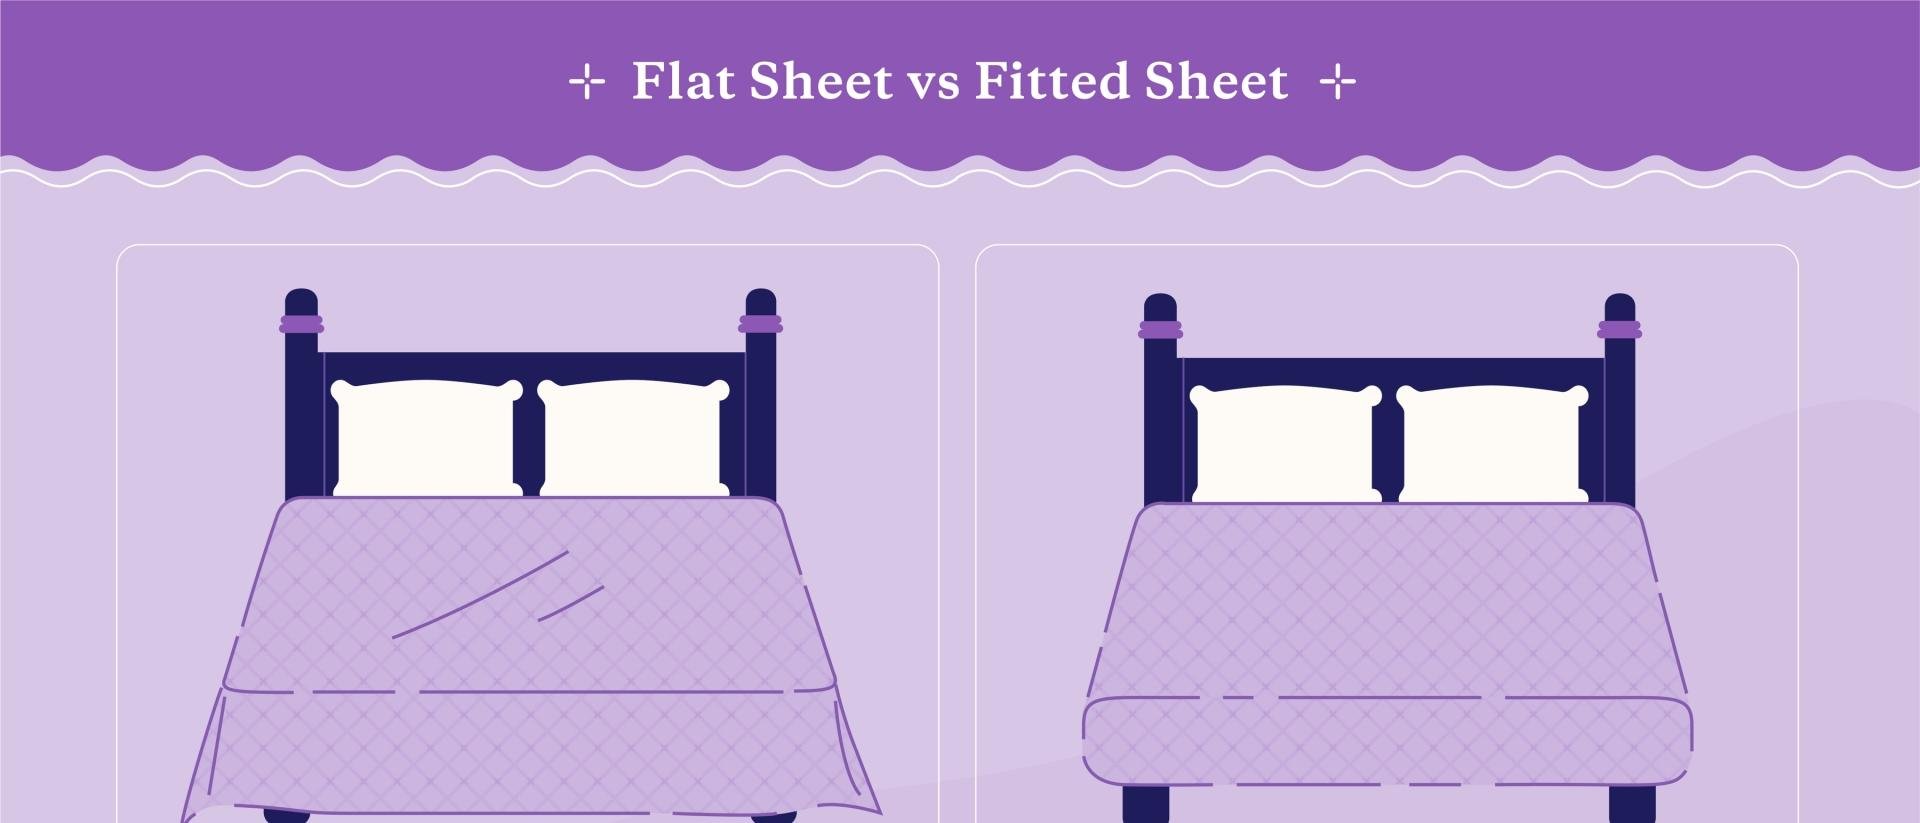 flat sheet vs fitted sheet on a bed